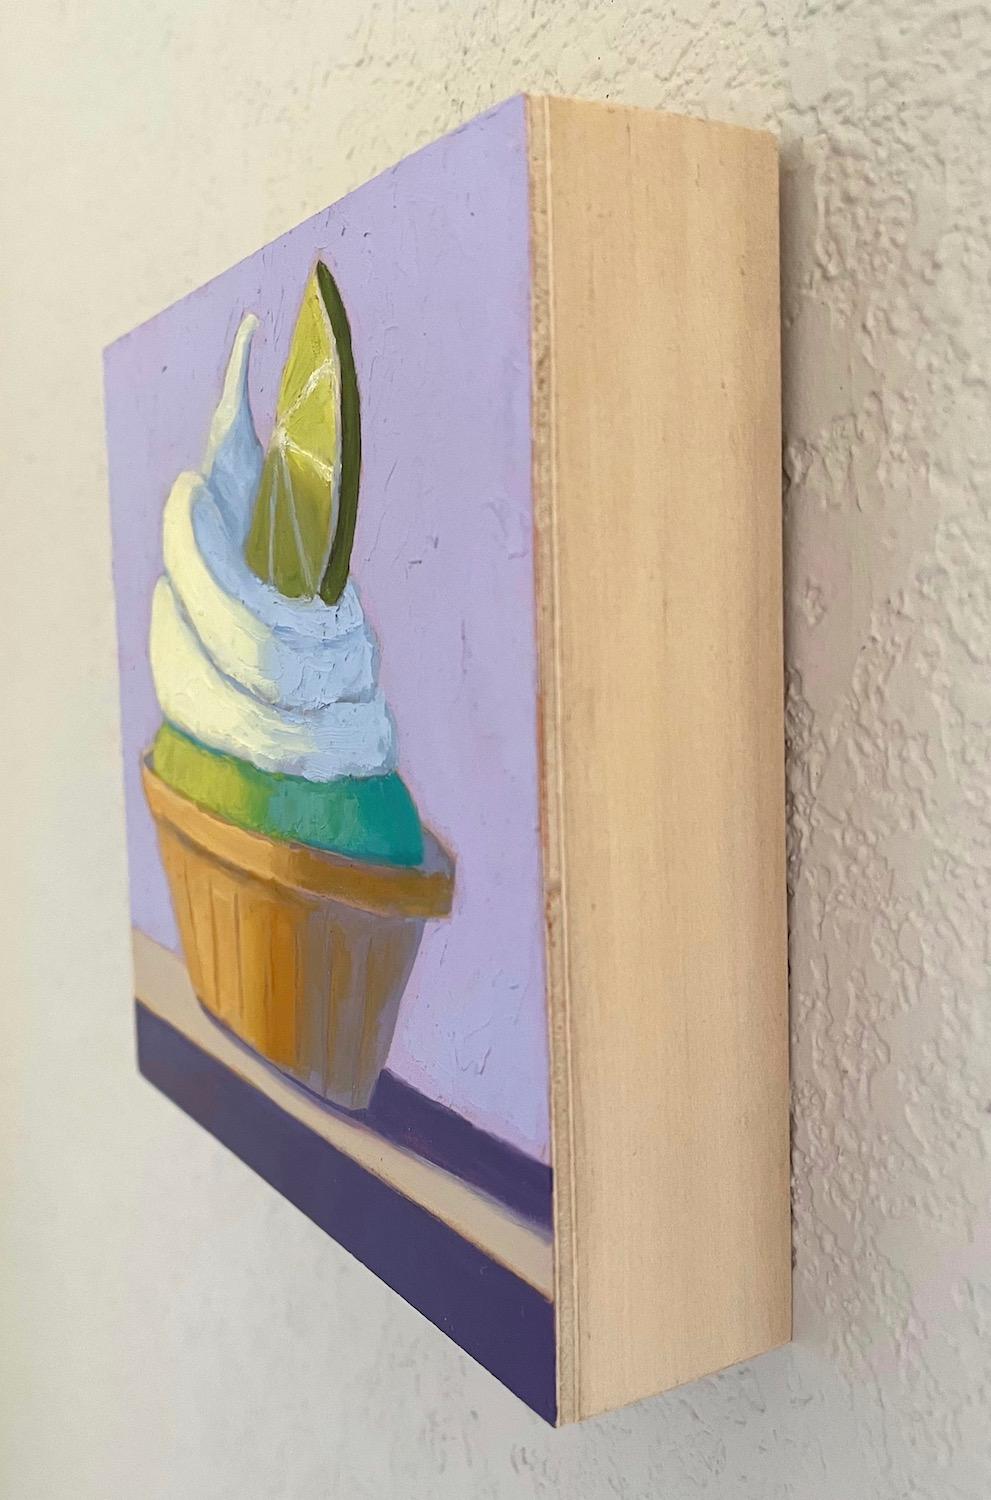 <p>Artist Comments<br>A lime tart with a whipped cream topping and a lime wedge serves as a delightful treat in this still-life painting. Soft visual texture extends from the dessert to the purple background. The artwork features a balance between